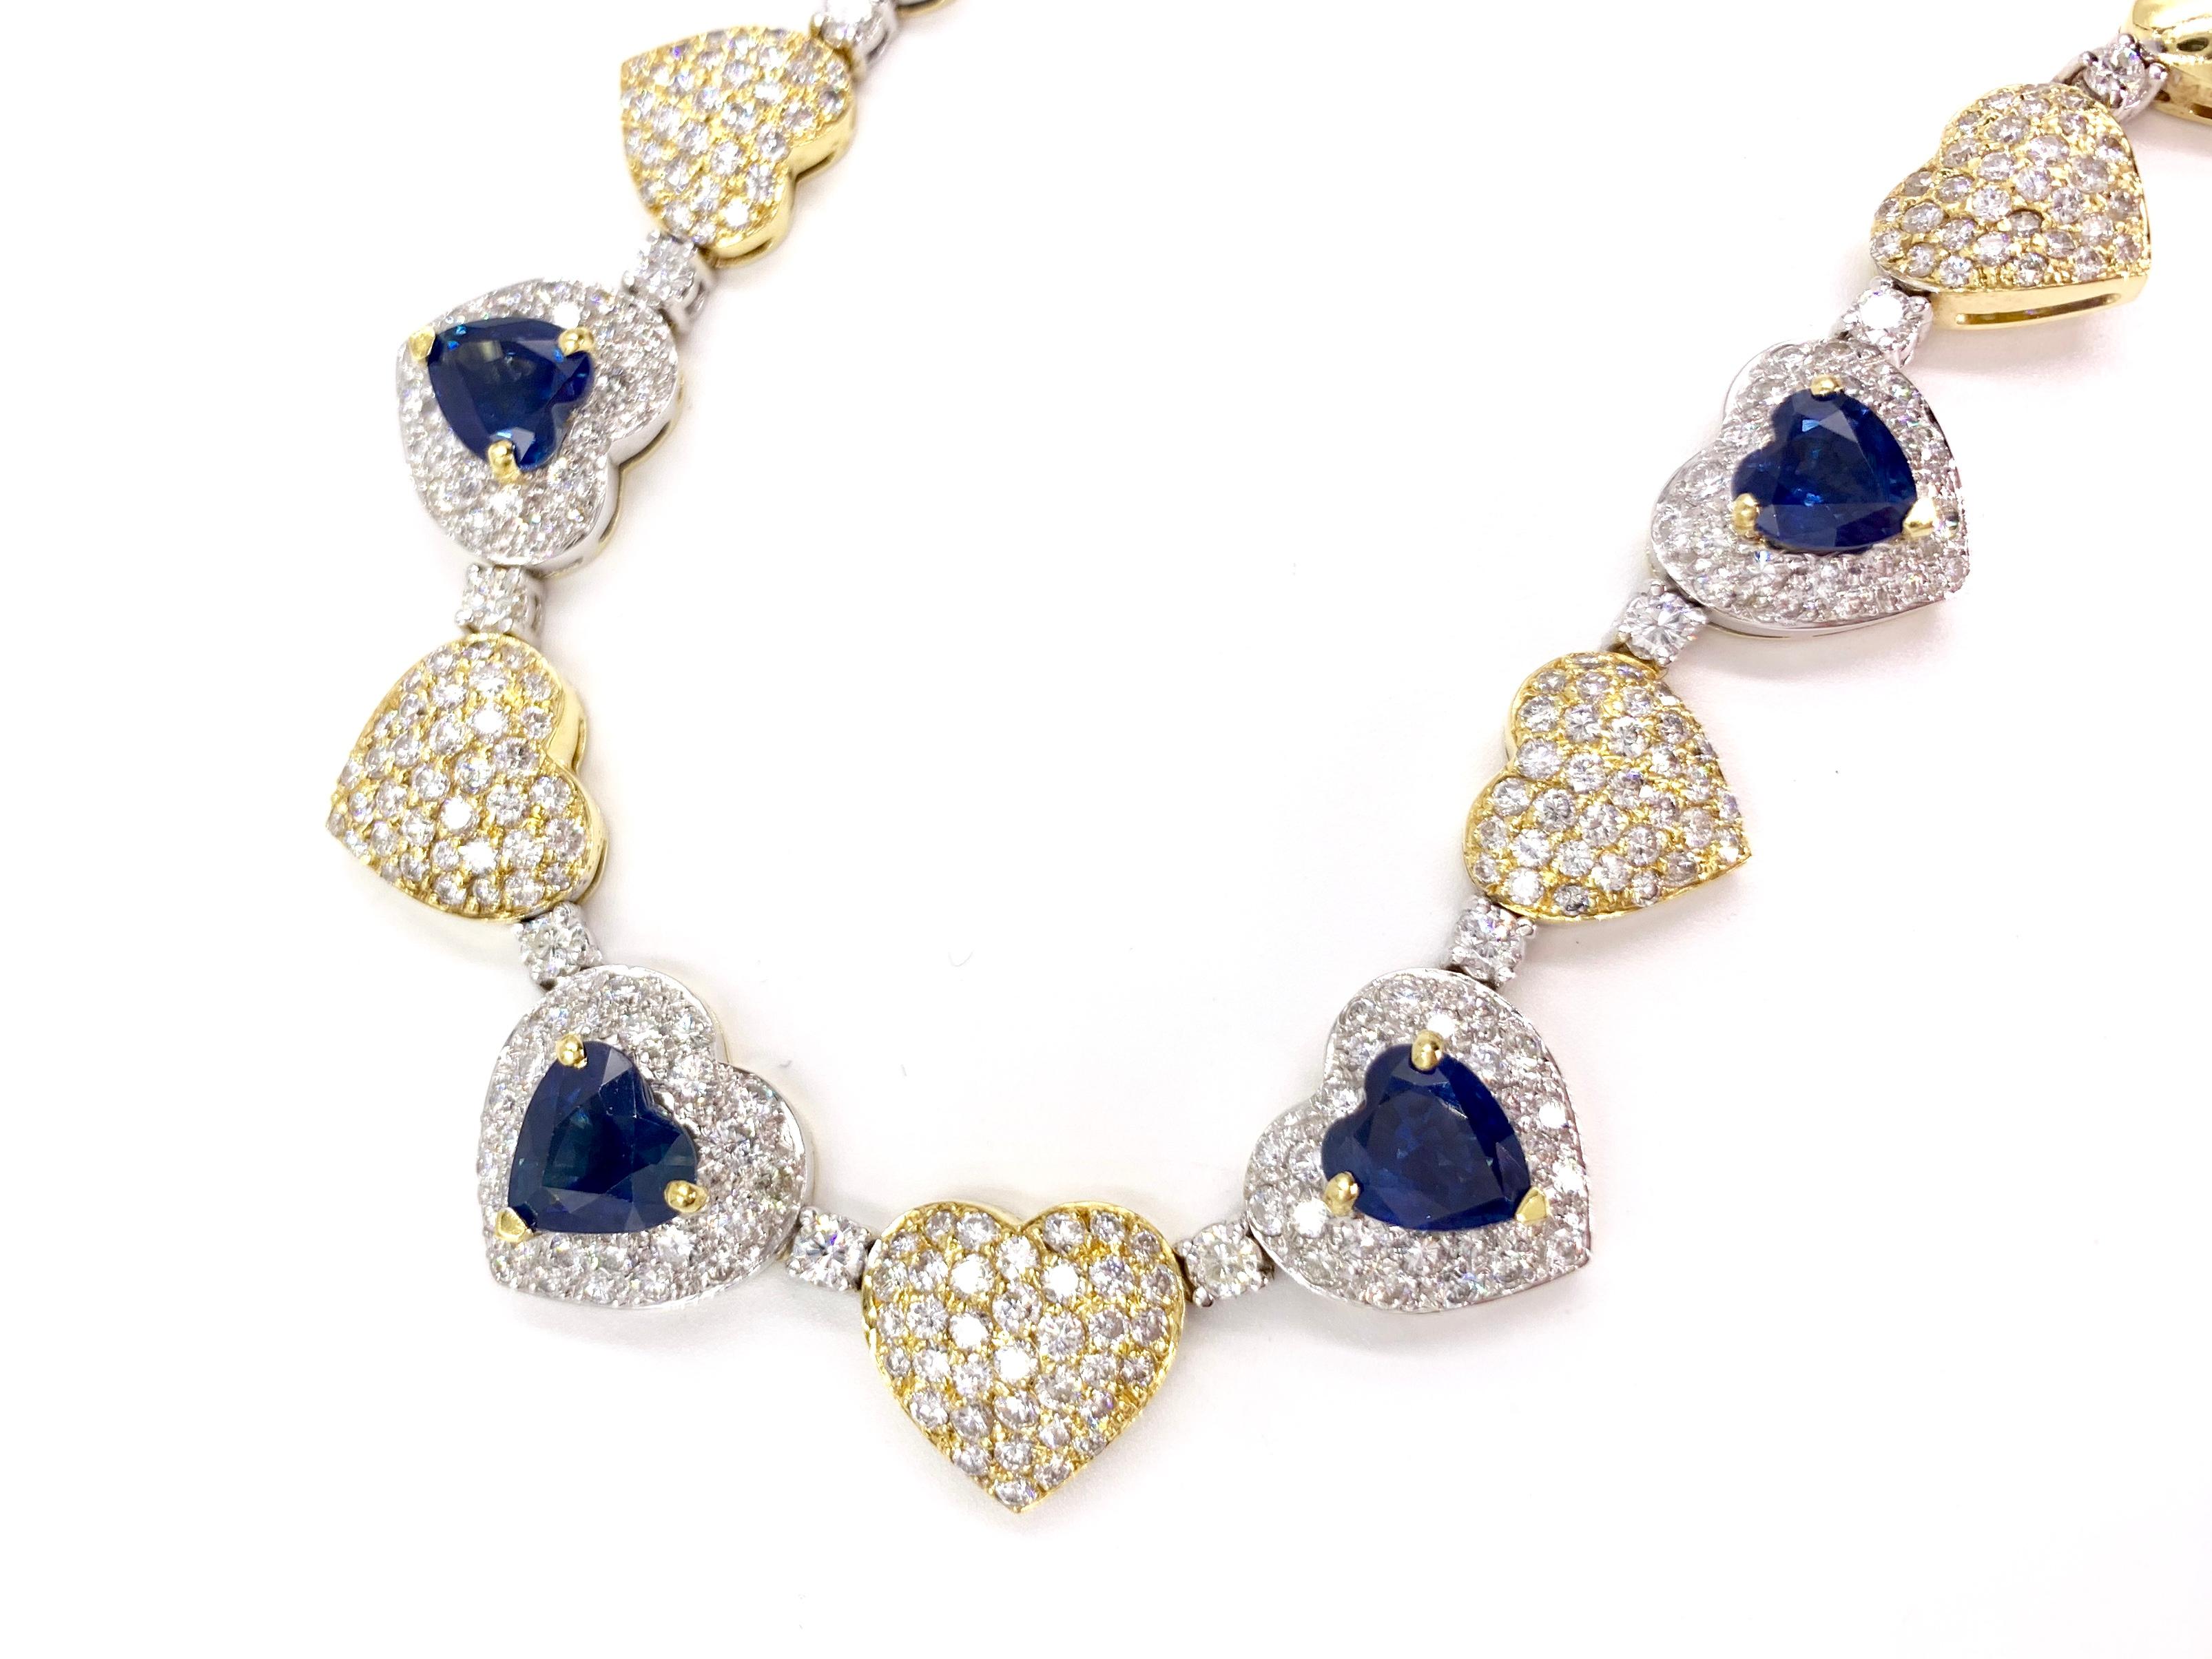 18 Karat Diamond and Sapphire Heart Necklace In Good Condition For Sale In Pikesville, MD